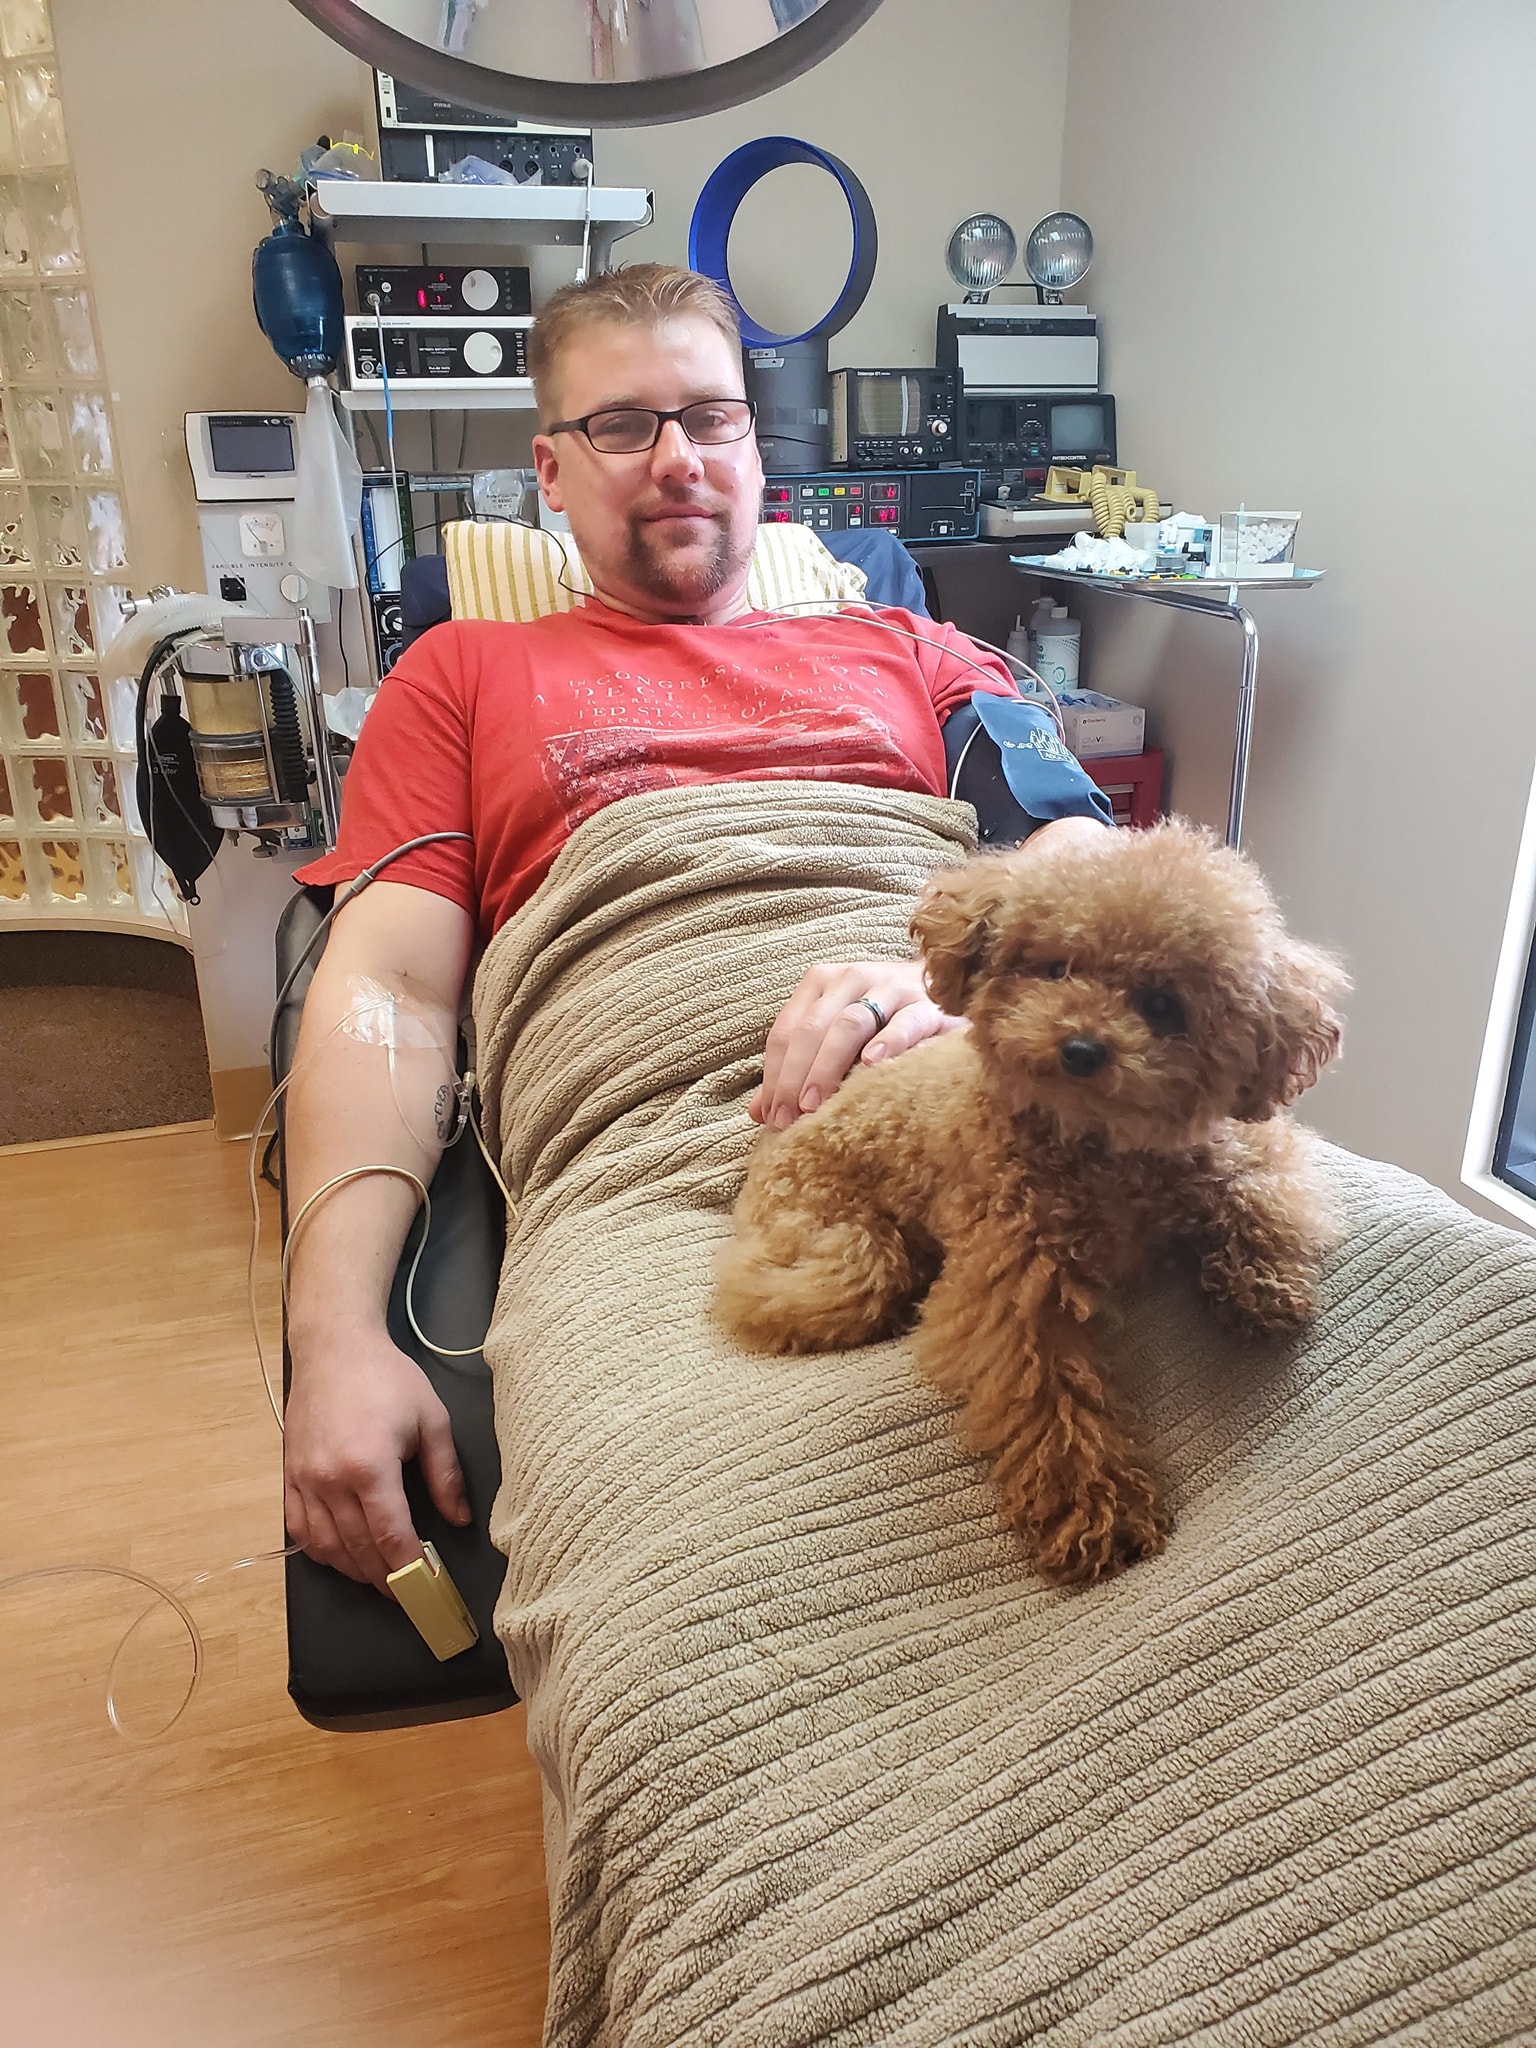 A bearded man on the examination chair with Gizmo the dog in his lap